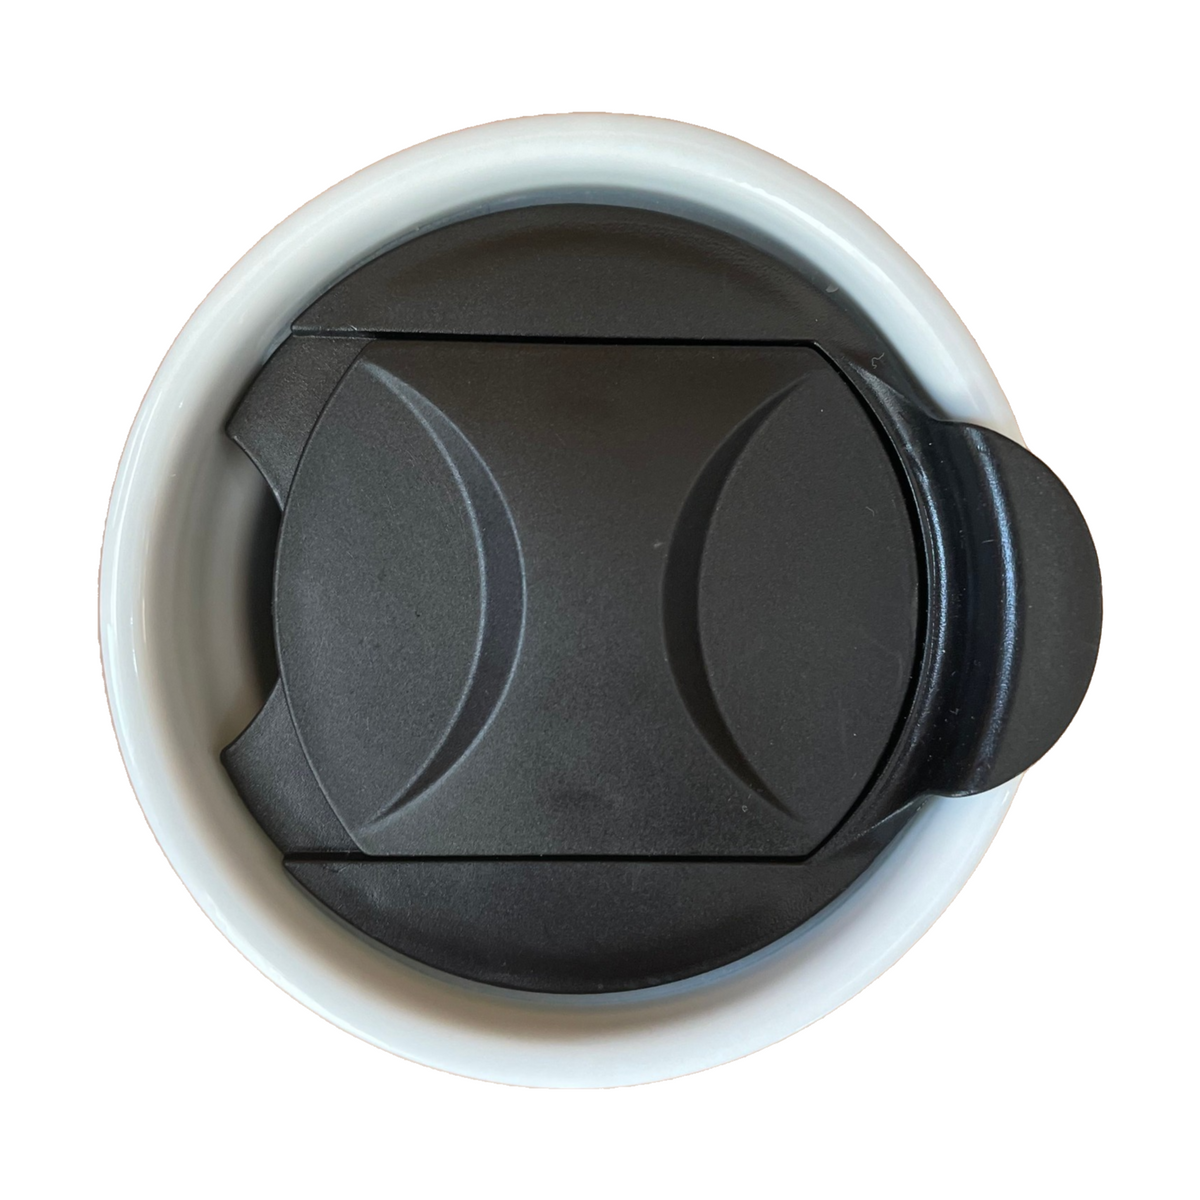 Teal Replacement Lid for Starbucks Ceramic Travel Mugs, Compatible